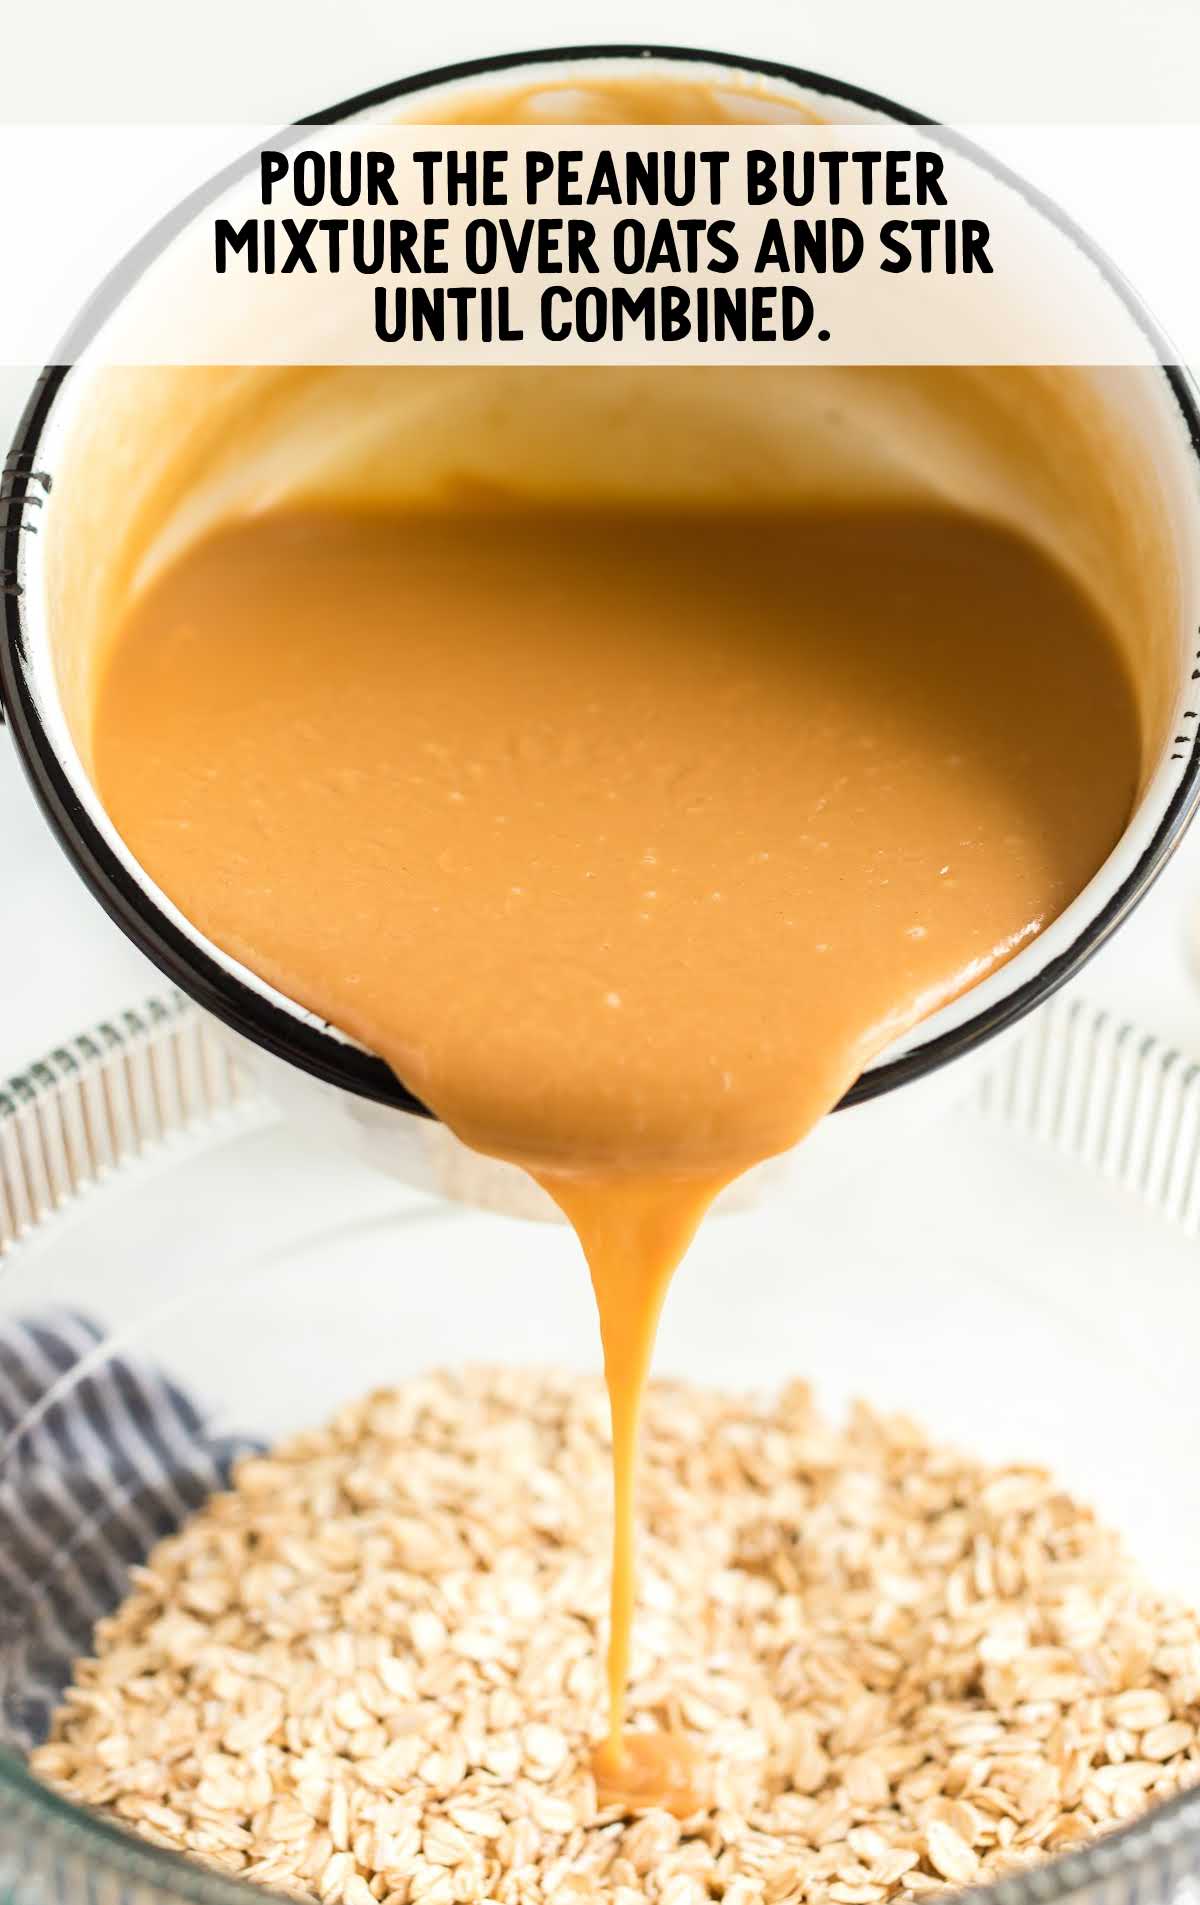 peanut butter mixture being poured over the oats